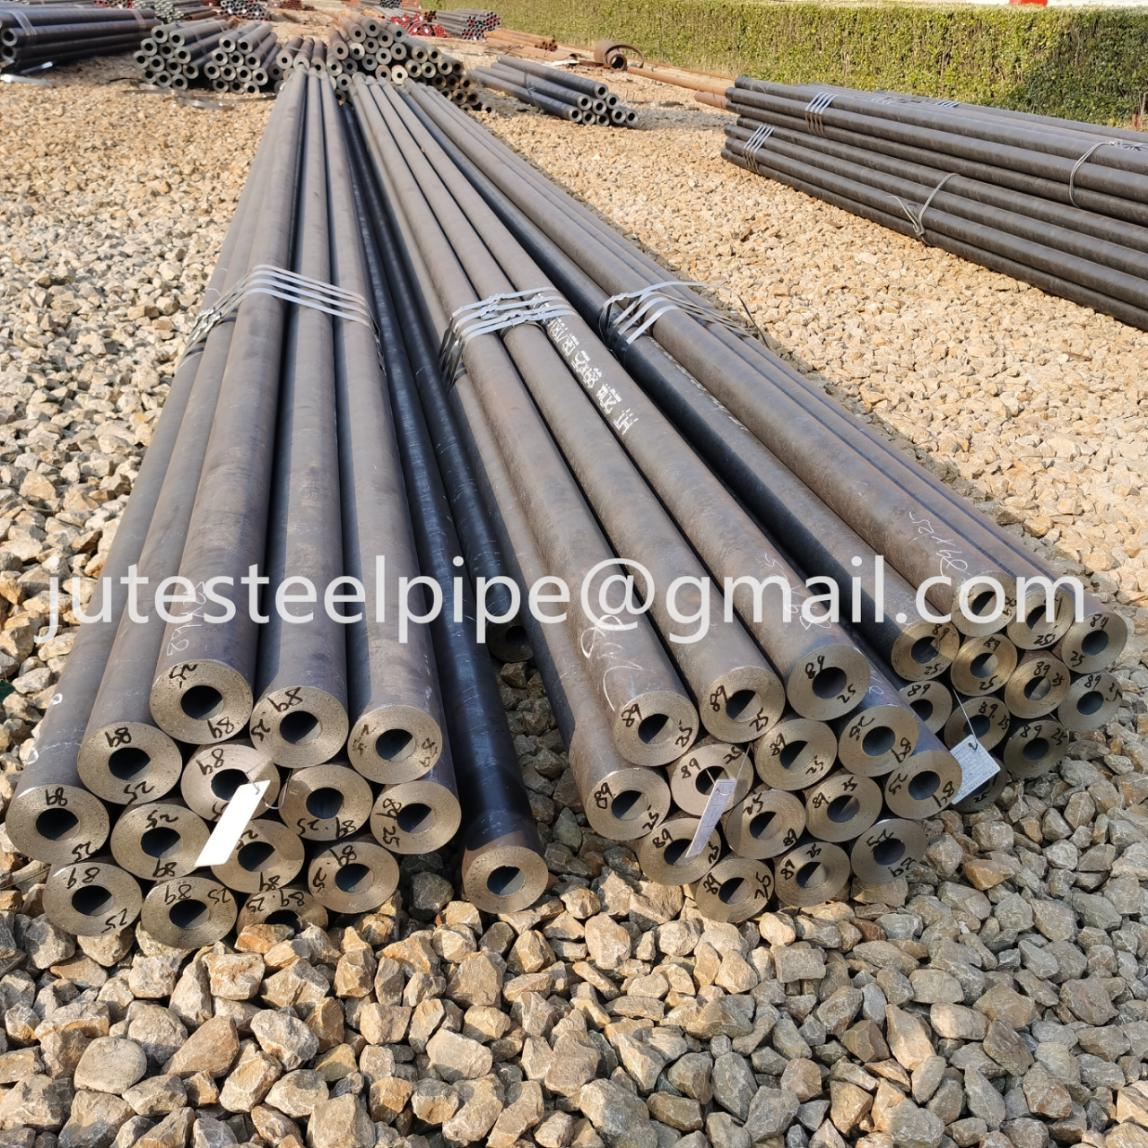 How to accurately identify the authenticity of the seamless steel pipe